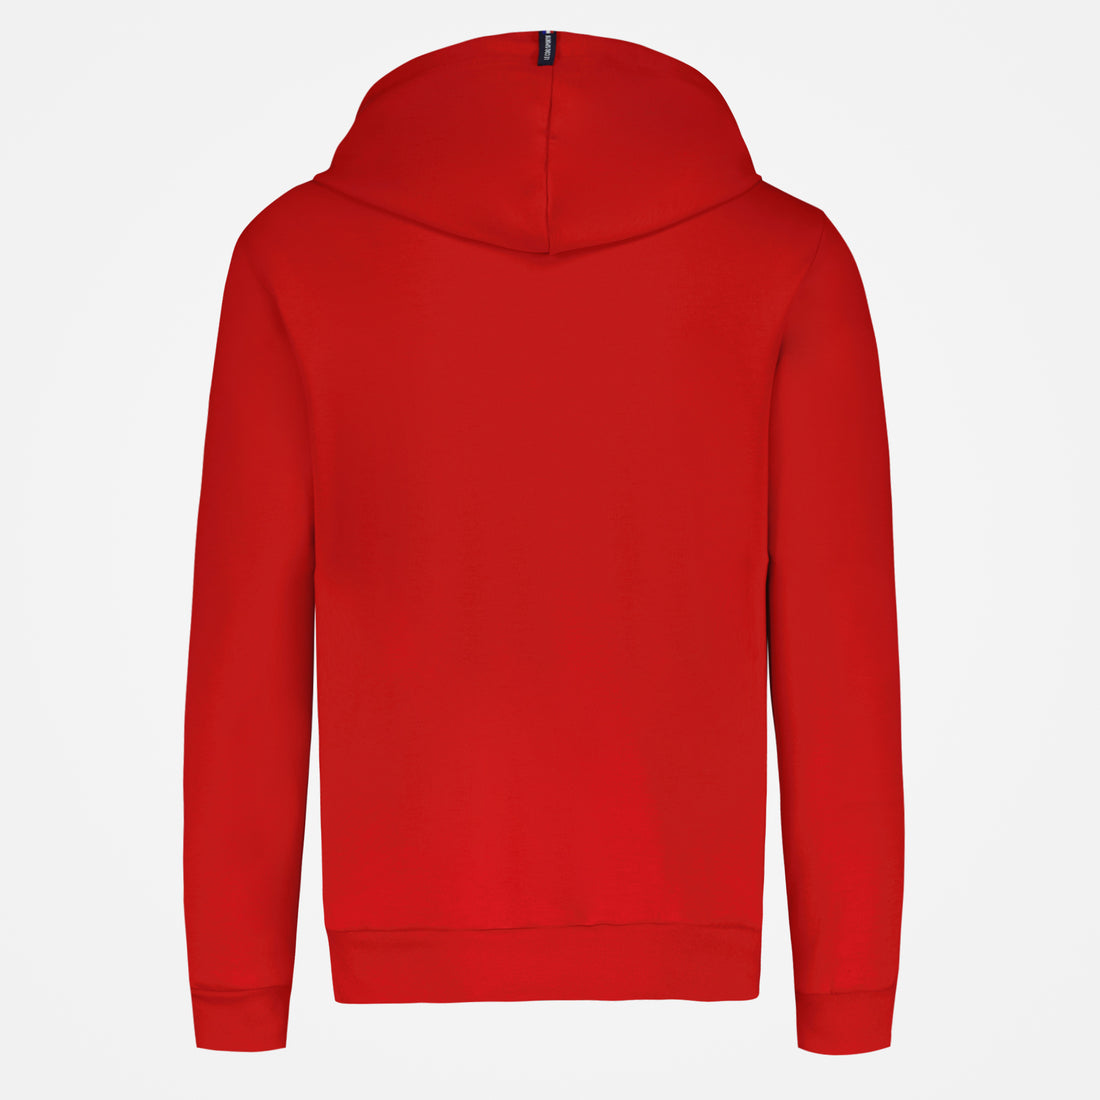 2310560-ESS Hoody N°2 M rouge electro | Sweat à capuche Homme